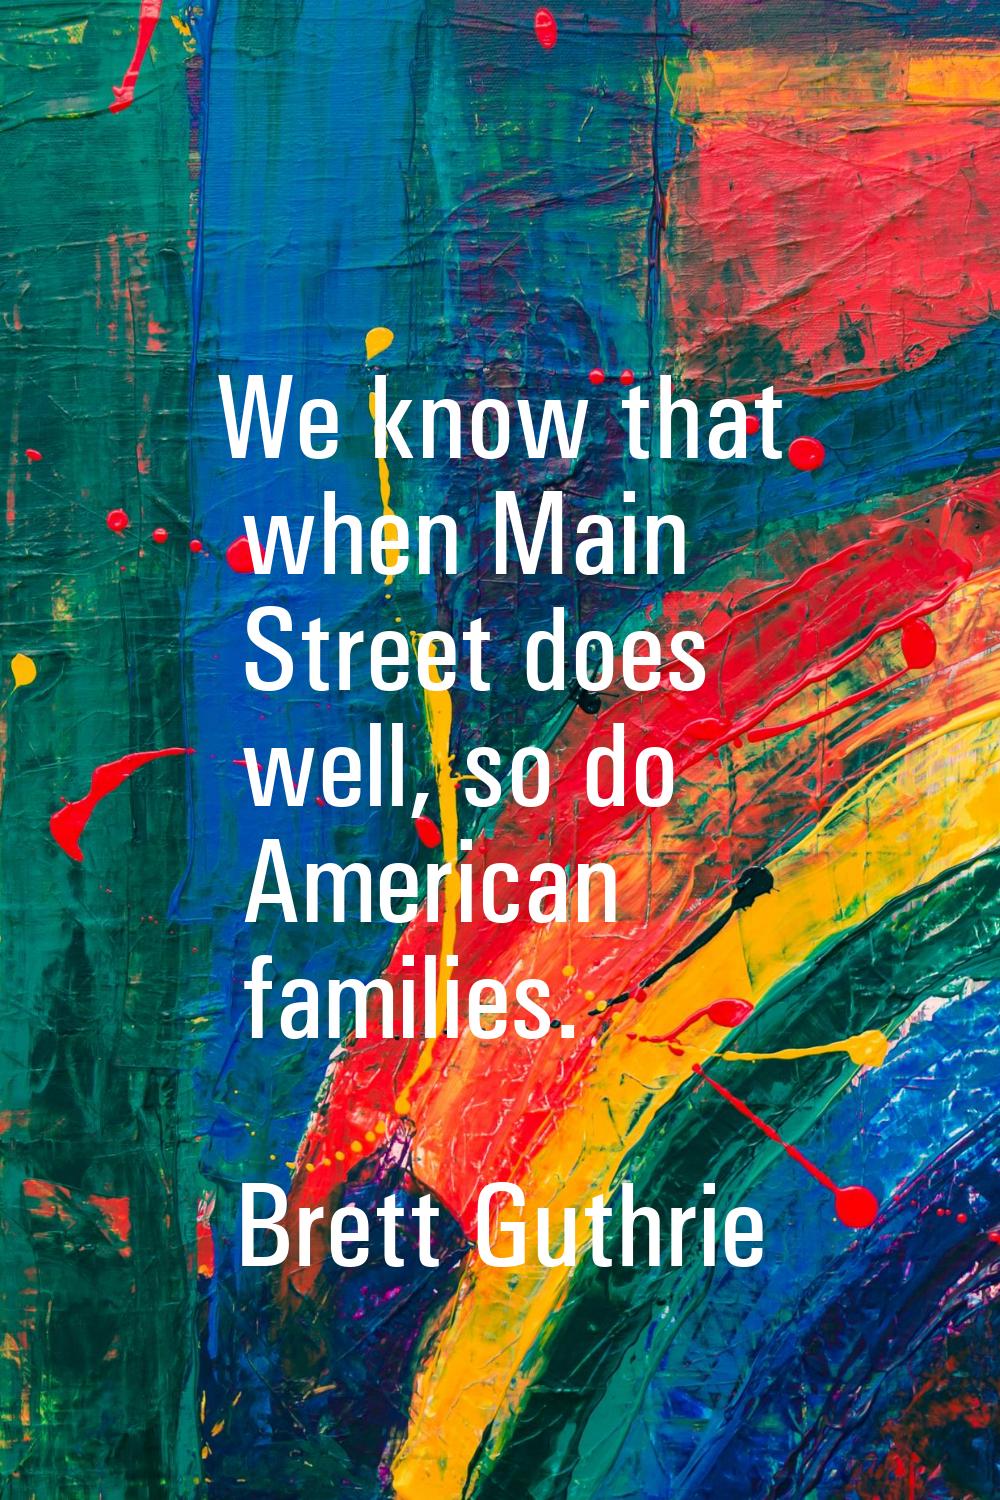 We know that when Main Street does well, so do American families.